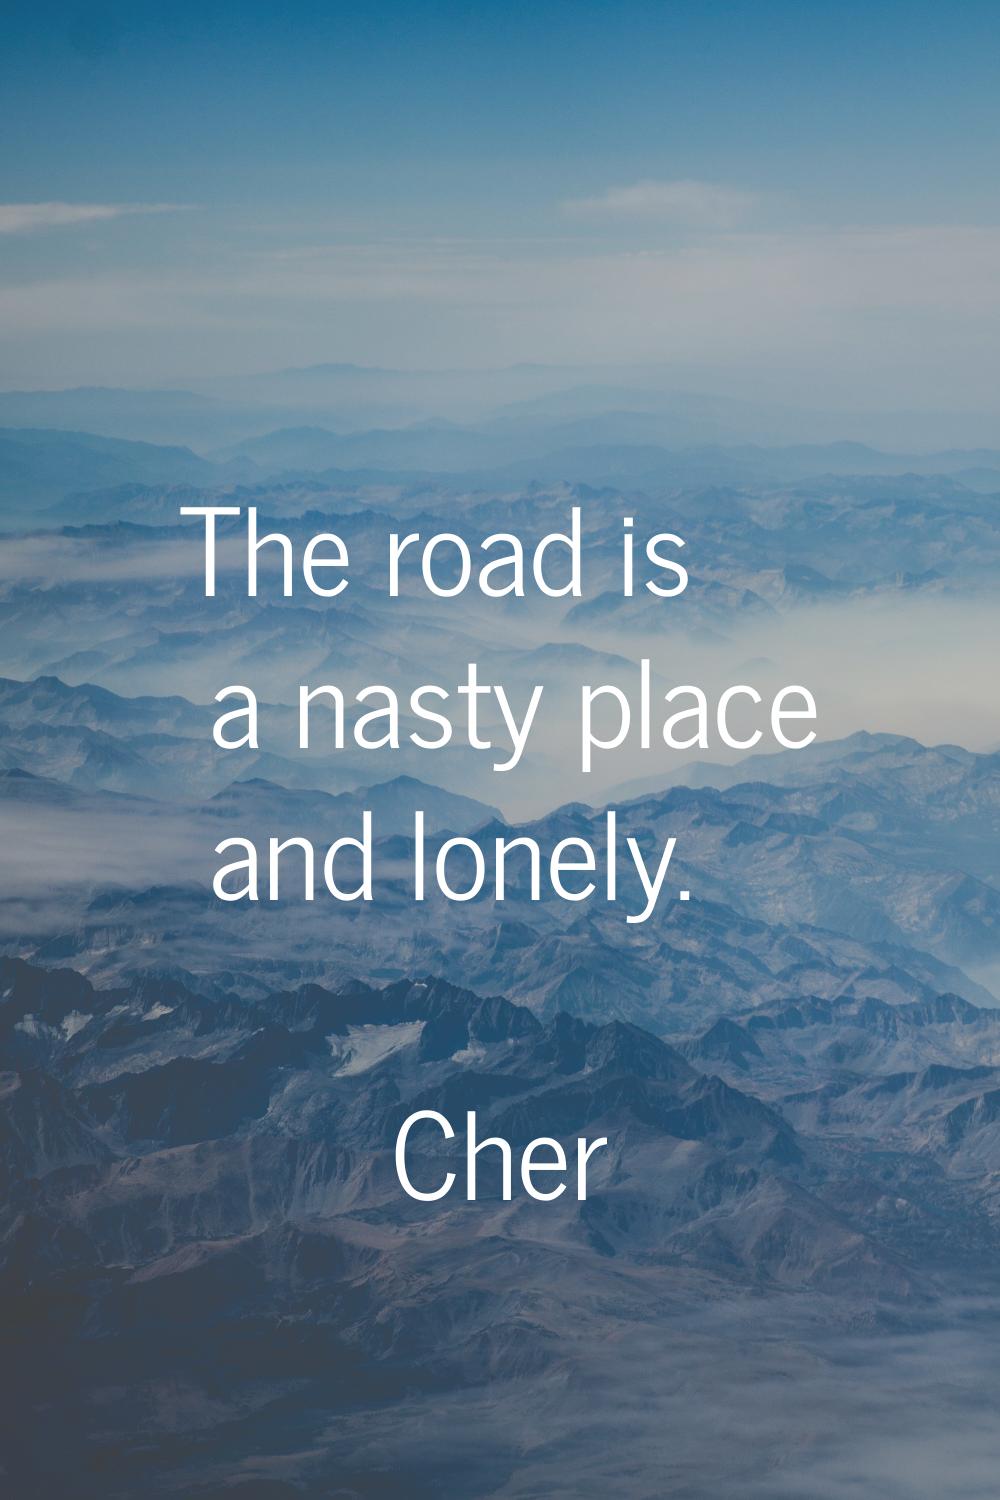 The road is a nasty place and lonely.